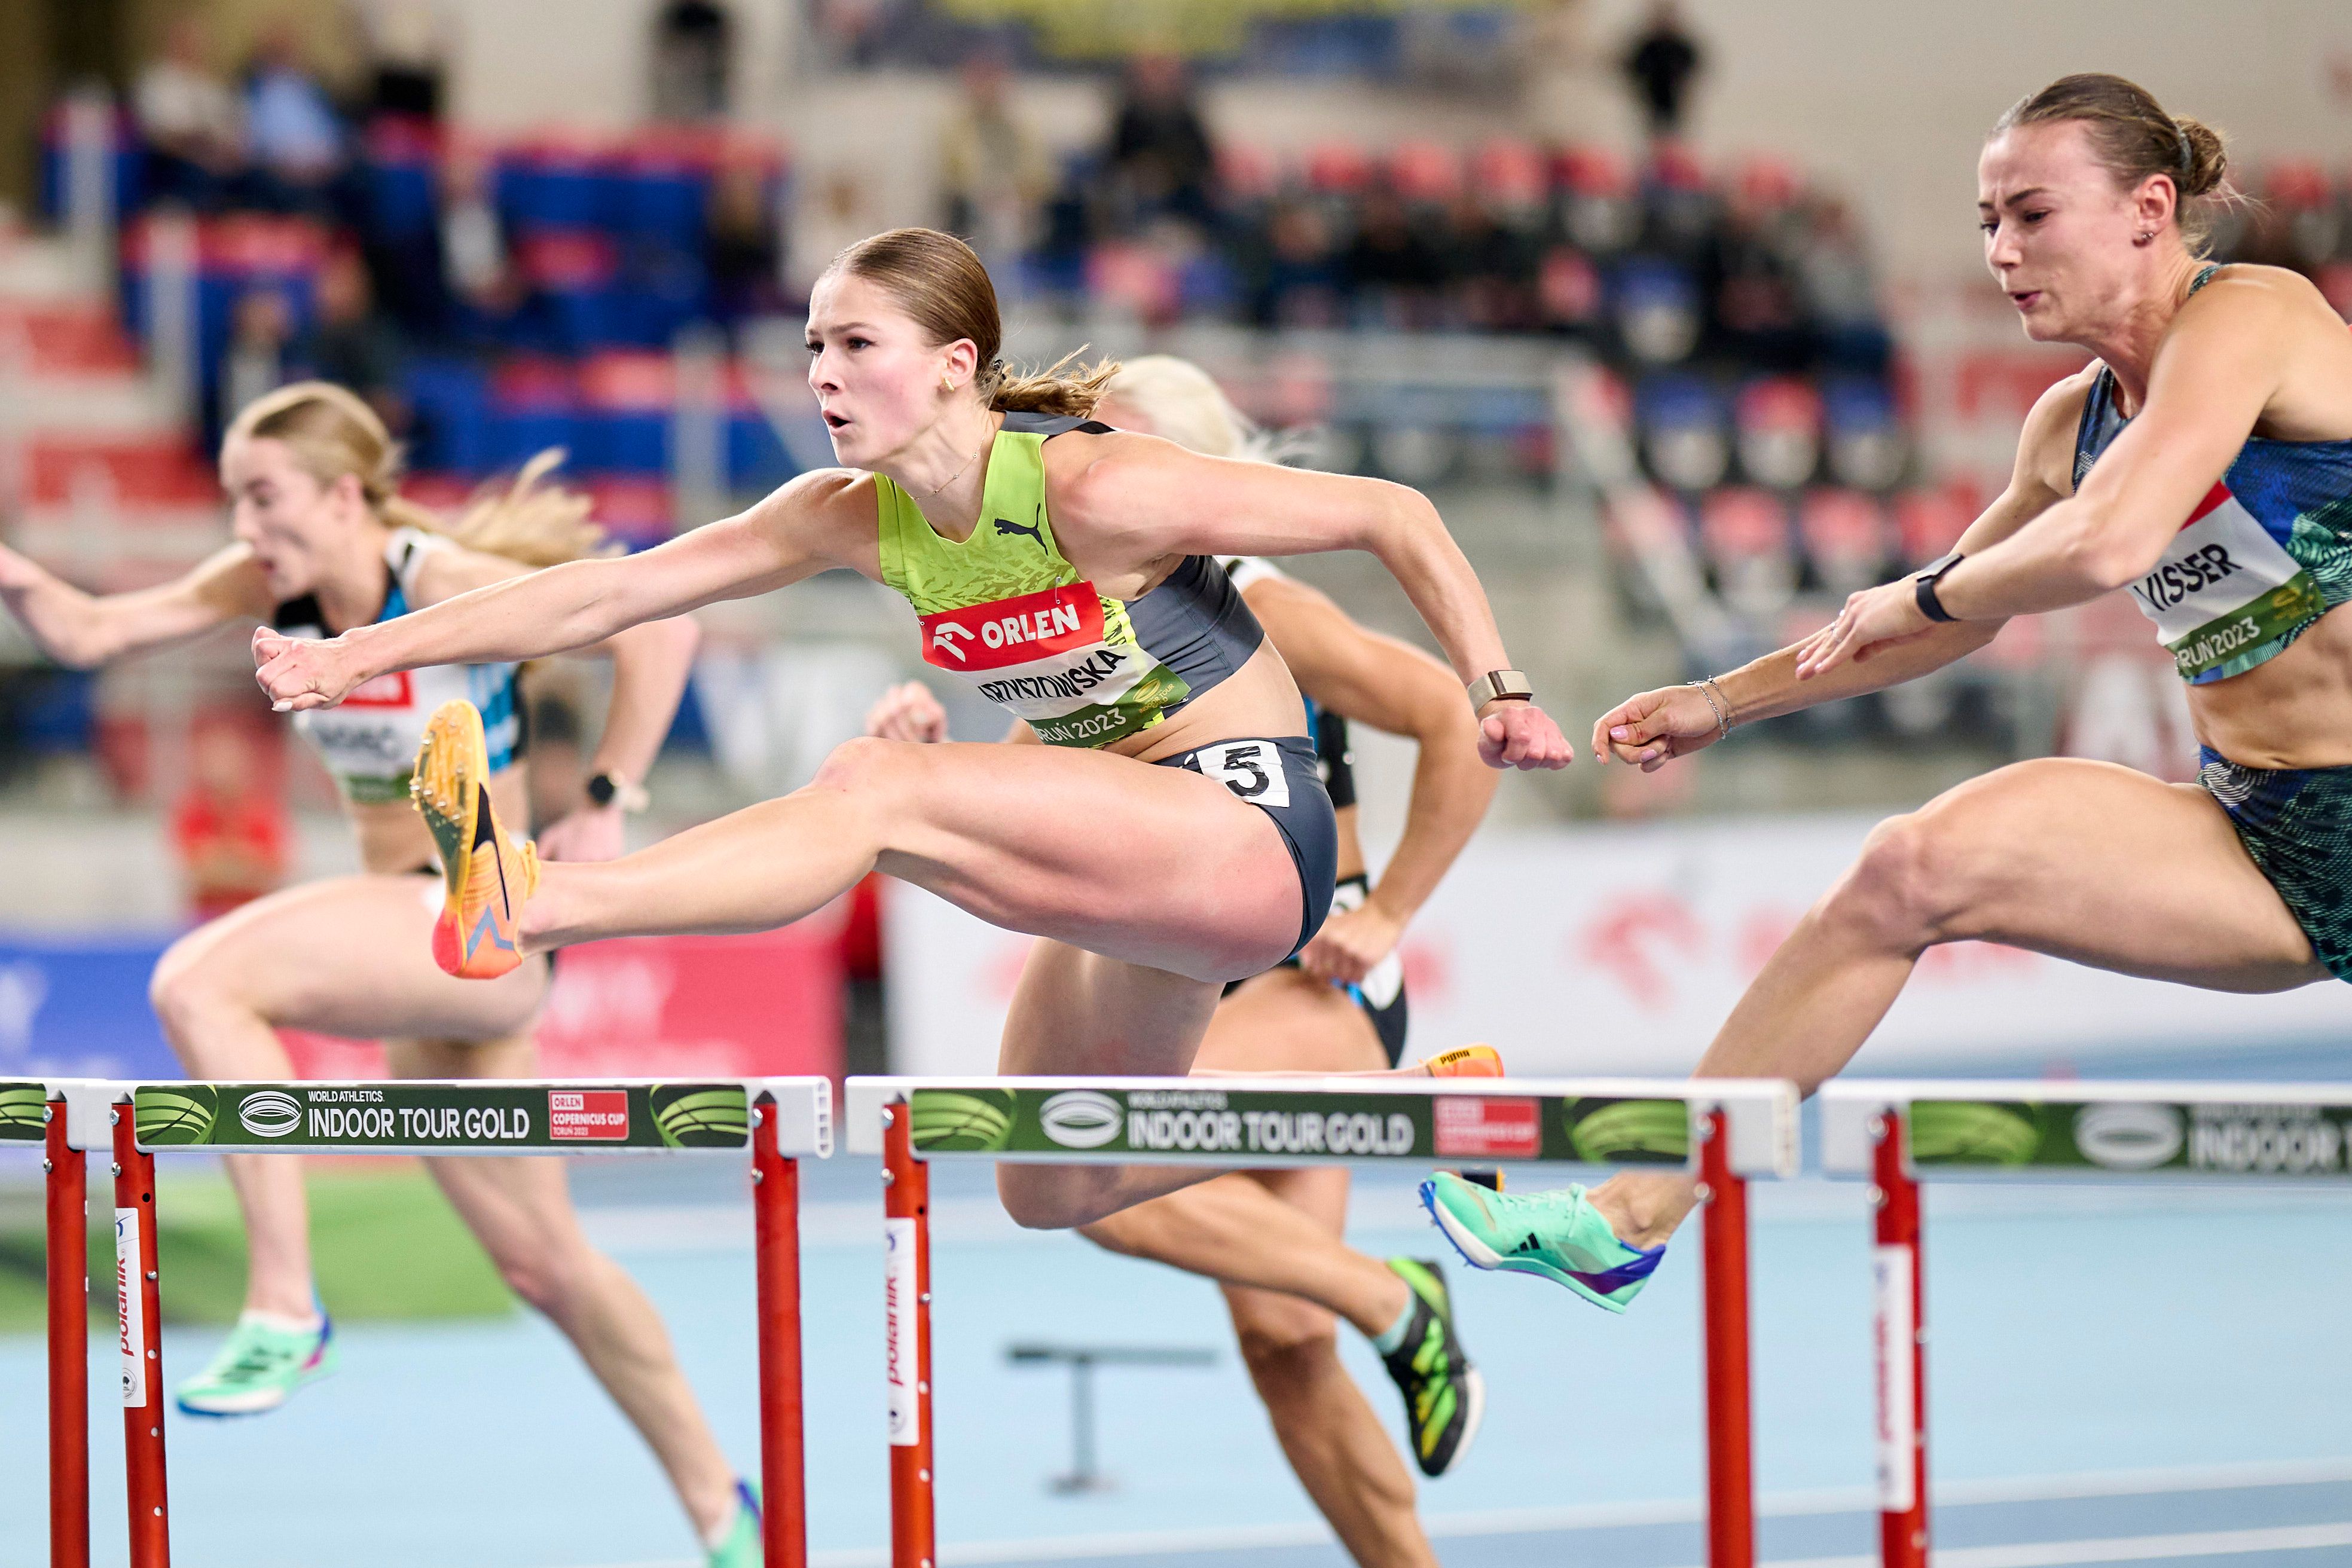 Pia Skrzyszowska in action at the World Athletics Indoor Tour Gold meeting in Torun